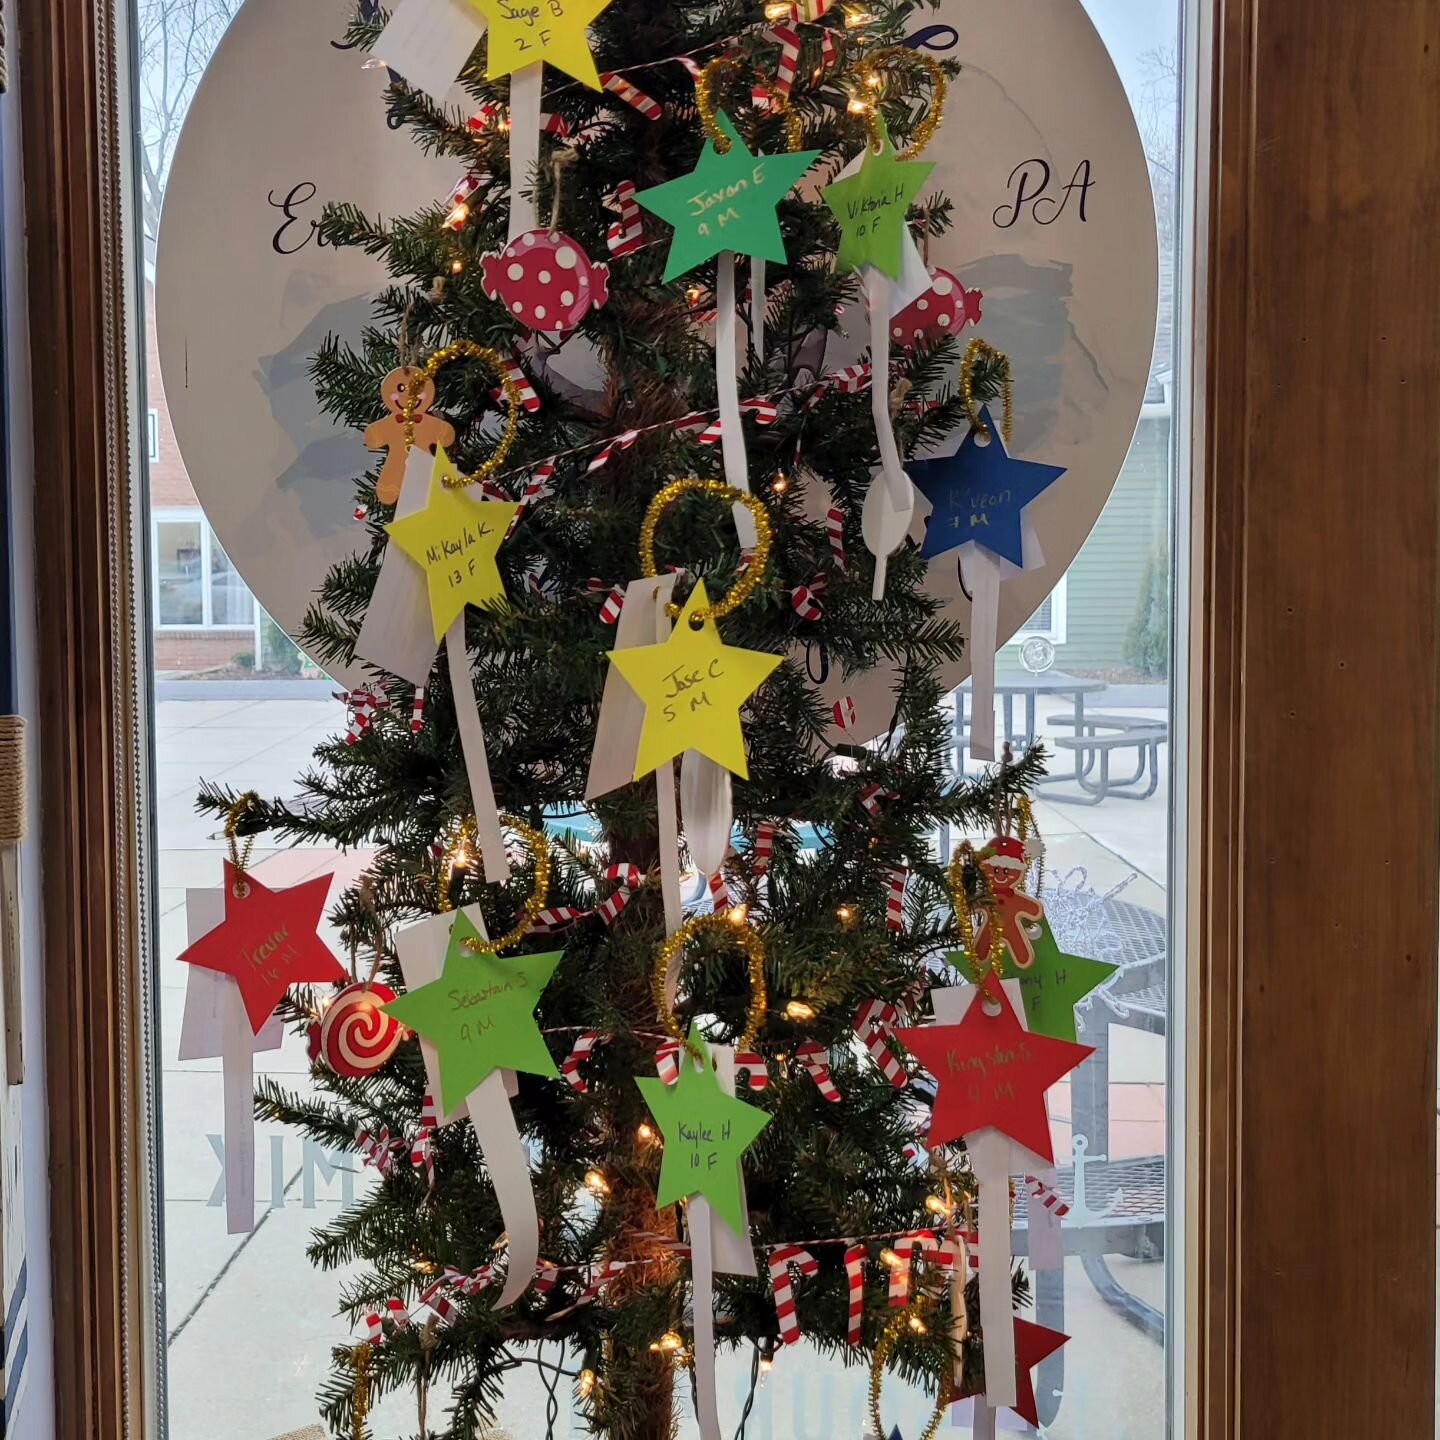 Our Angel Tree is up and there are kids who need presents!! The Achievement Center has been kind enough to allow us to help out some great kids...now we need you! Come pick a star off the tree and &quot;adopt&quot; a child for Christmas! Return prese